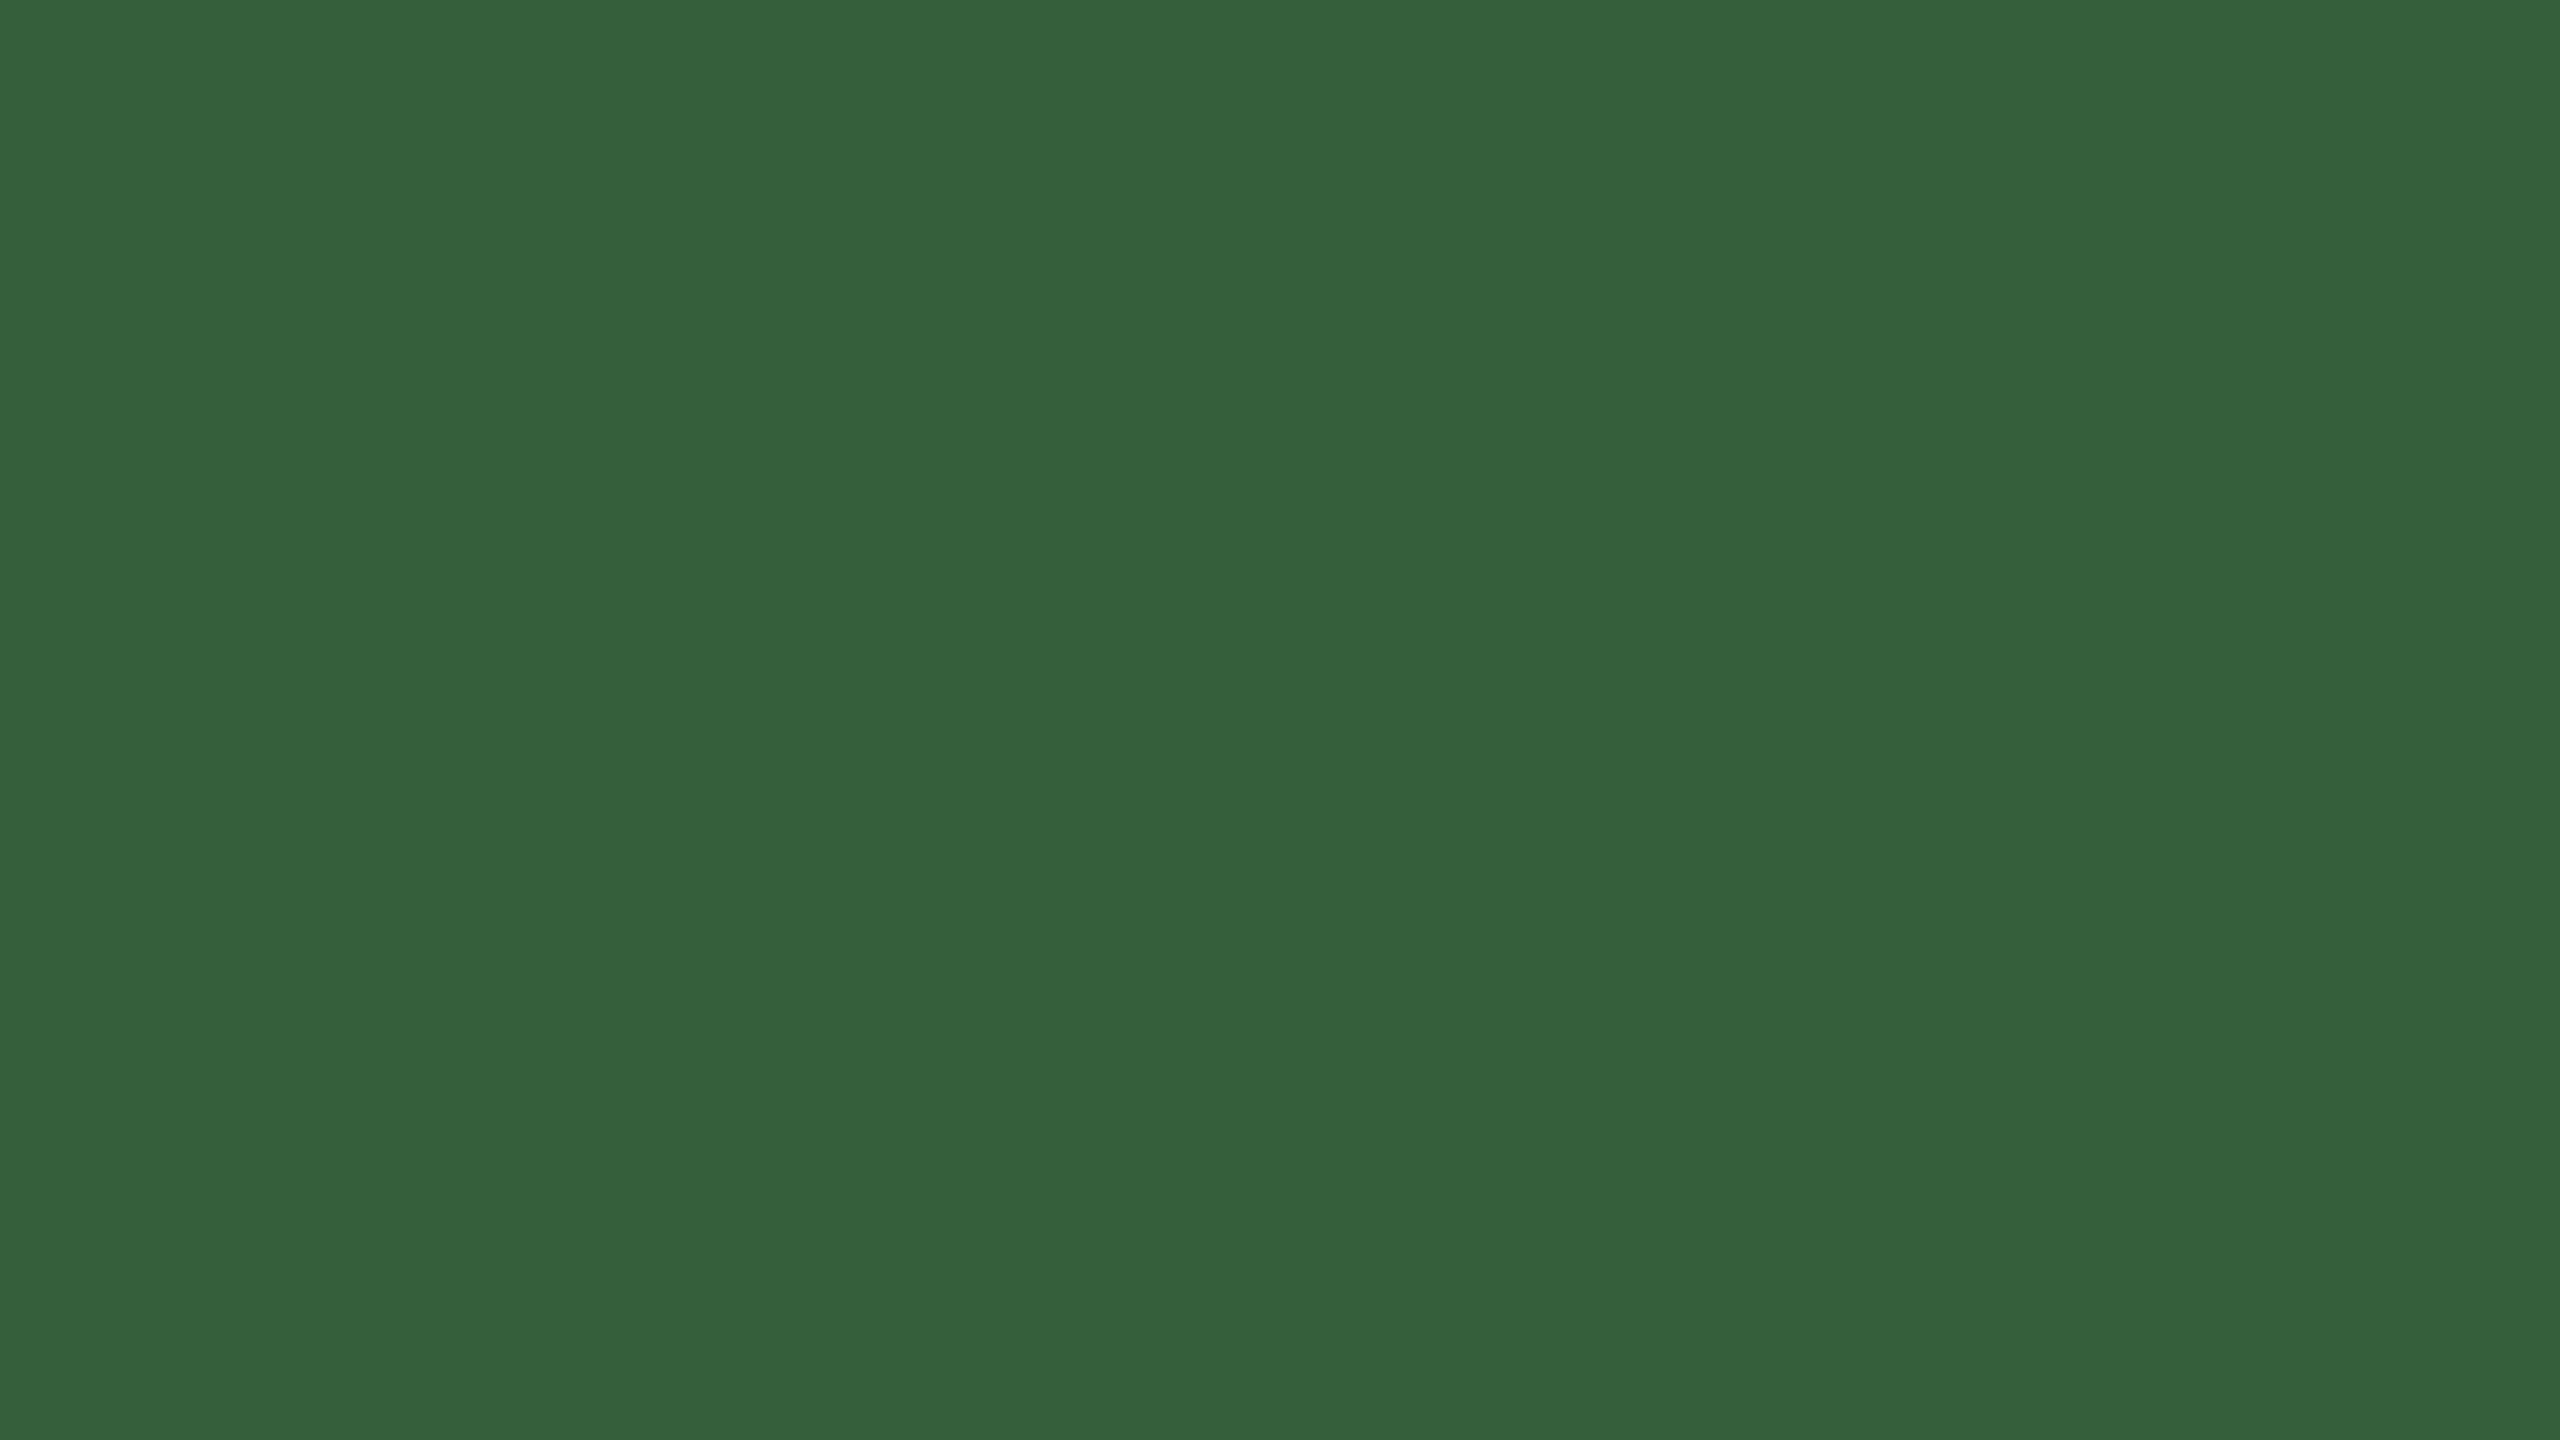 2560x1440 Hunter Green Solid Color Background